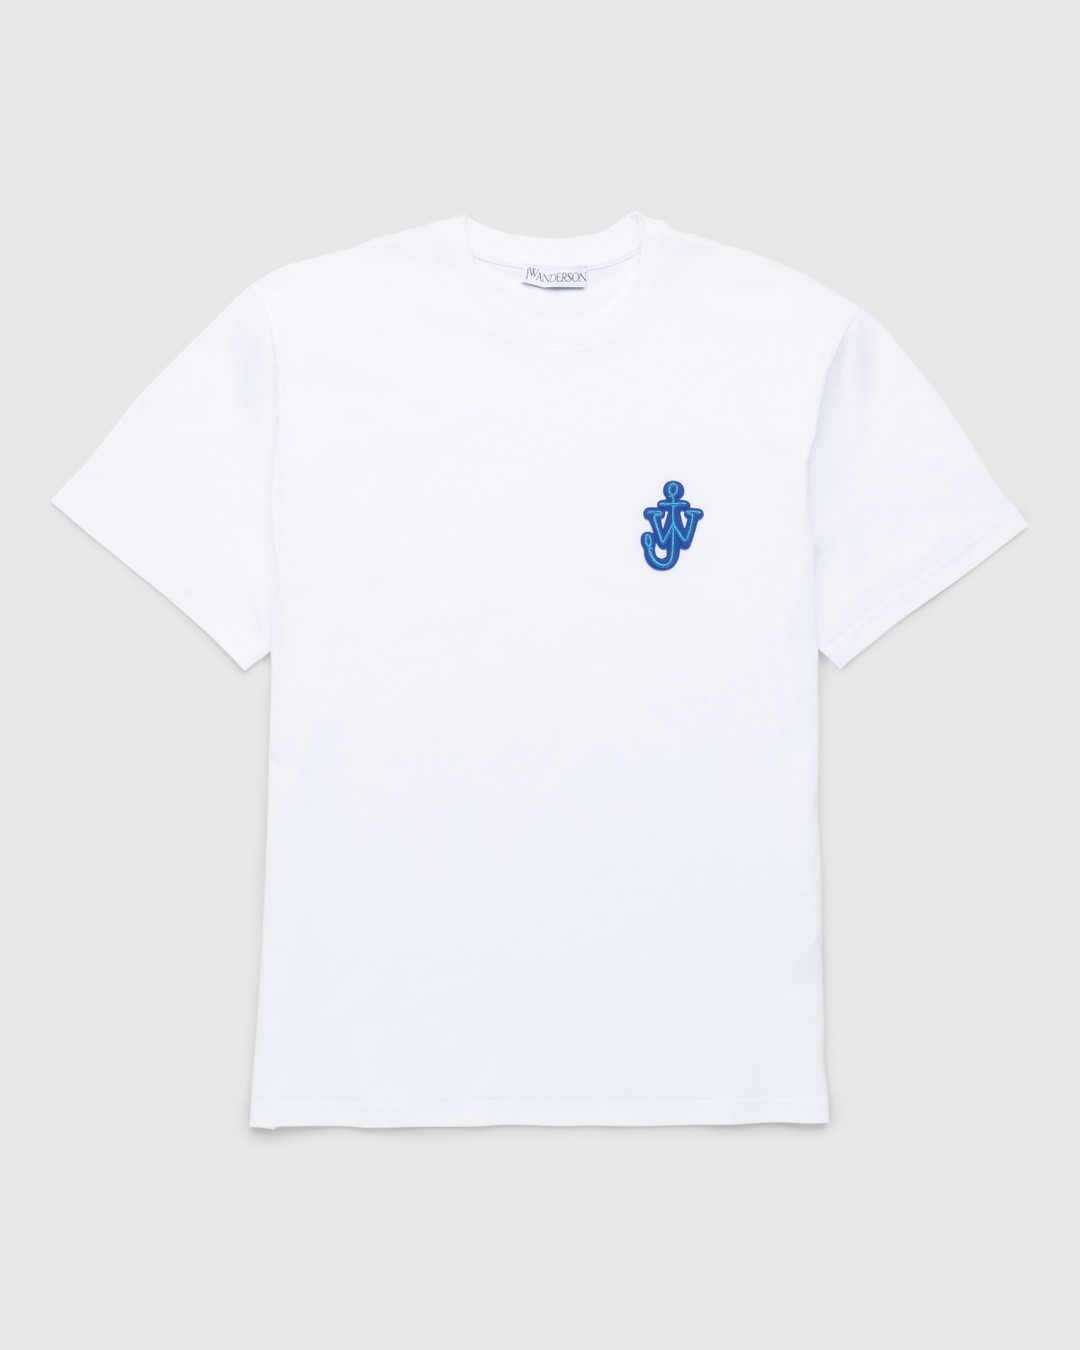 J.W. Anderson – Anchor Patch T-Shirt White - T-shirts - White - Image 1